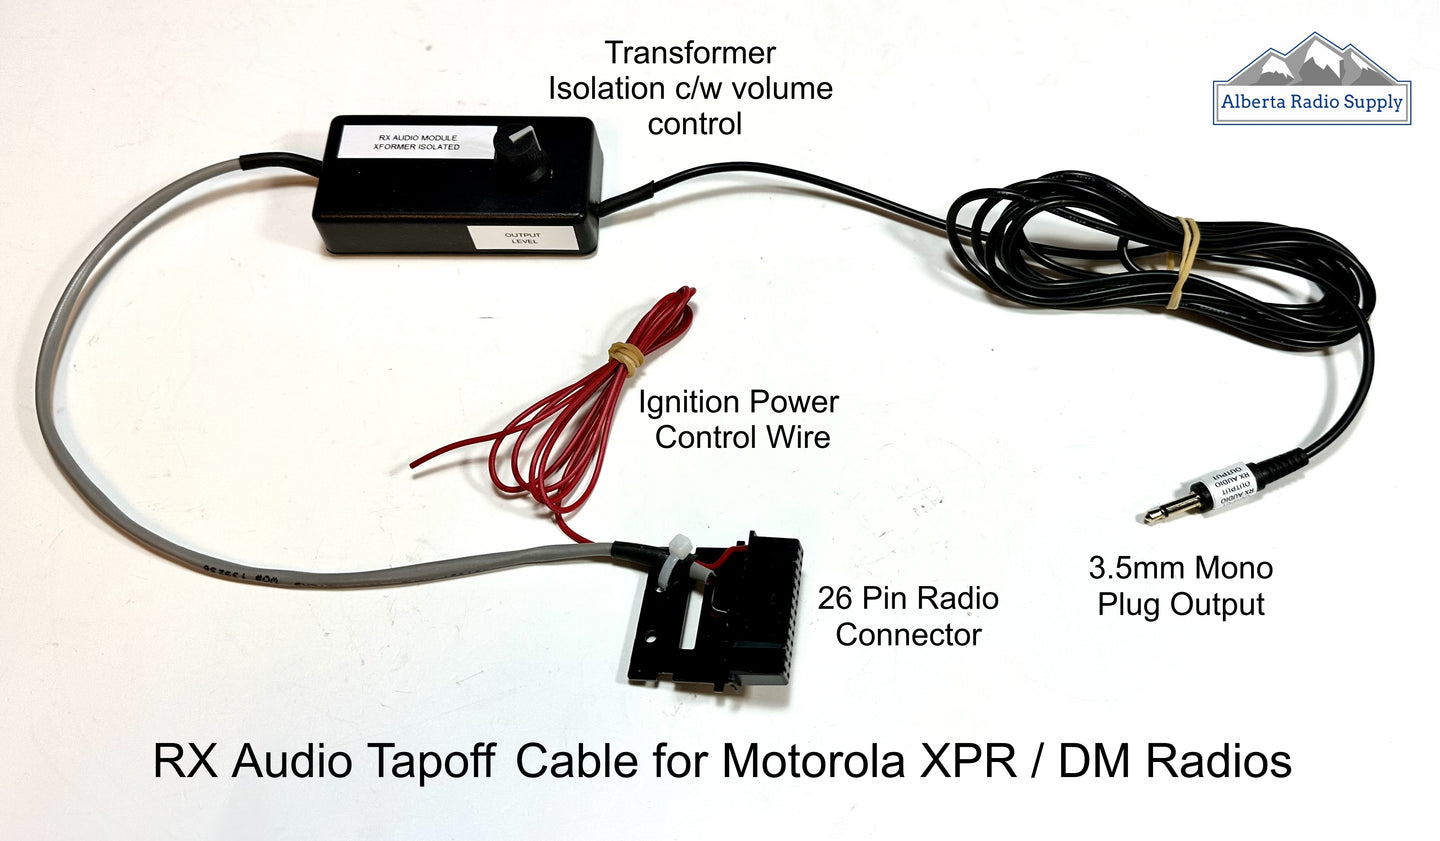 RX Audio TAPOFF Cable for Motorola XPR / DM Radios